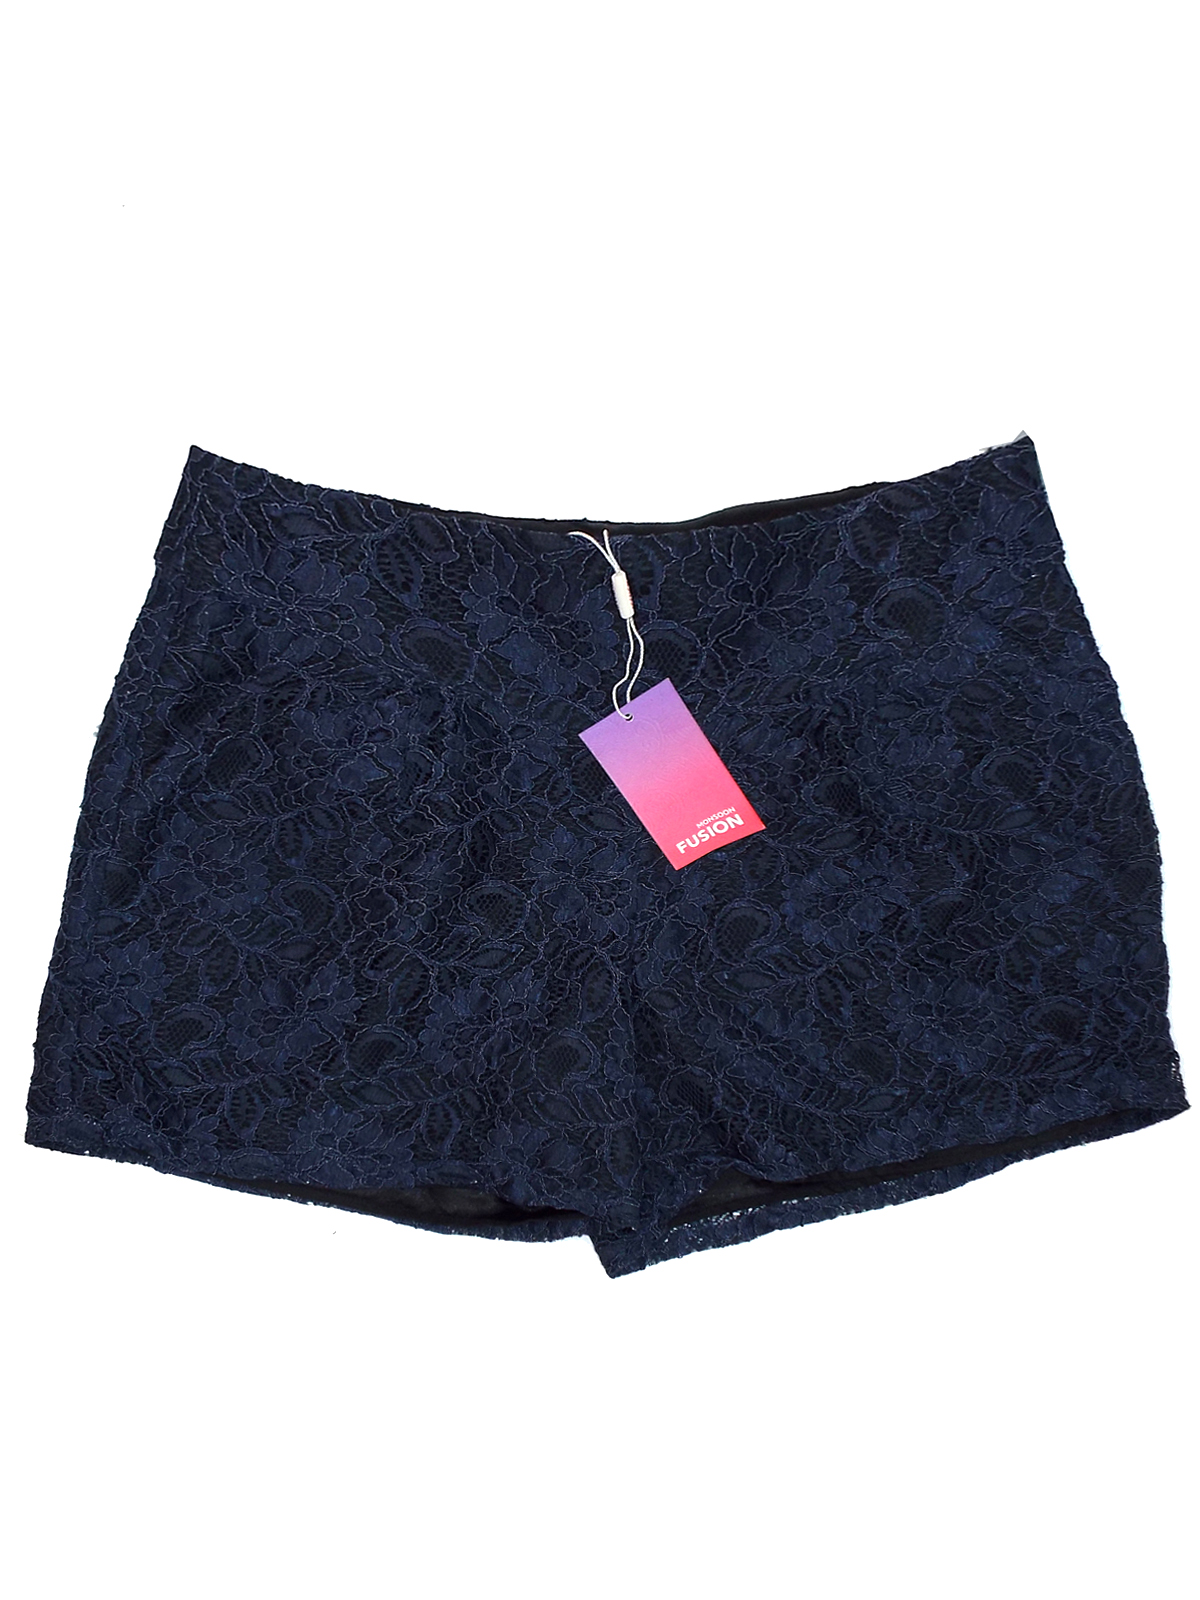 M0nsoon ASSORTED Ladies Shorts - Size 8 to 18